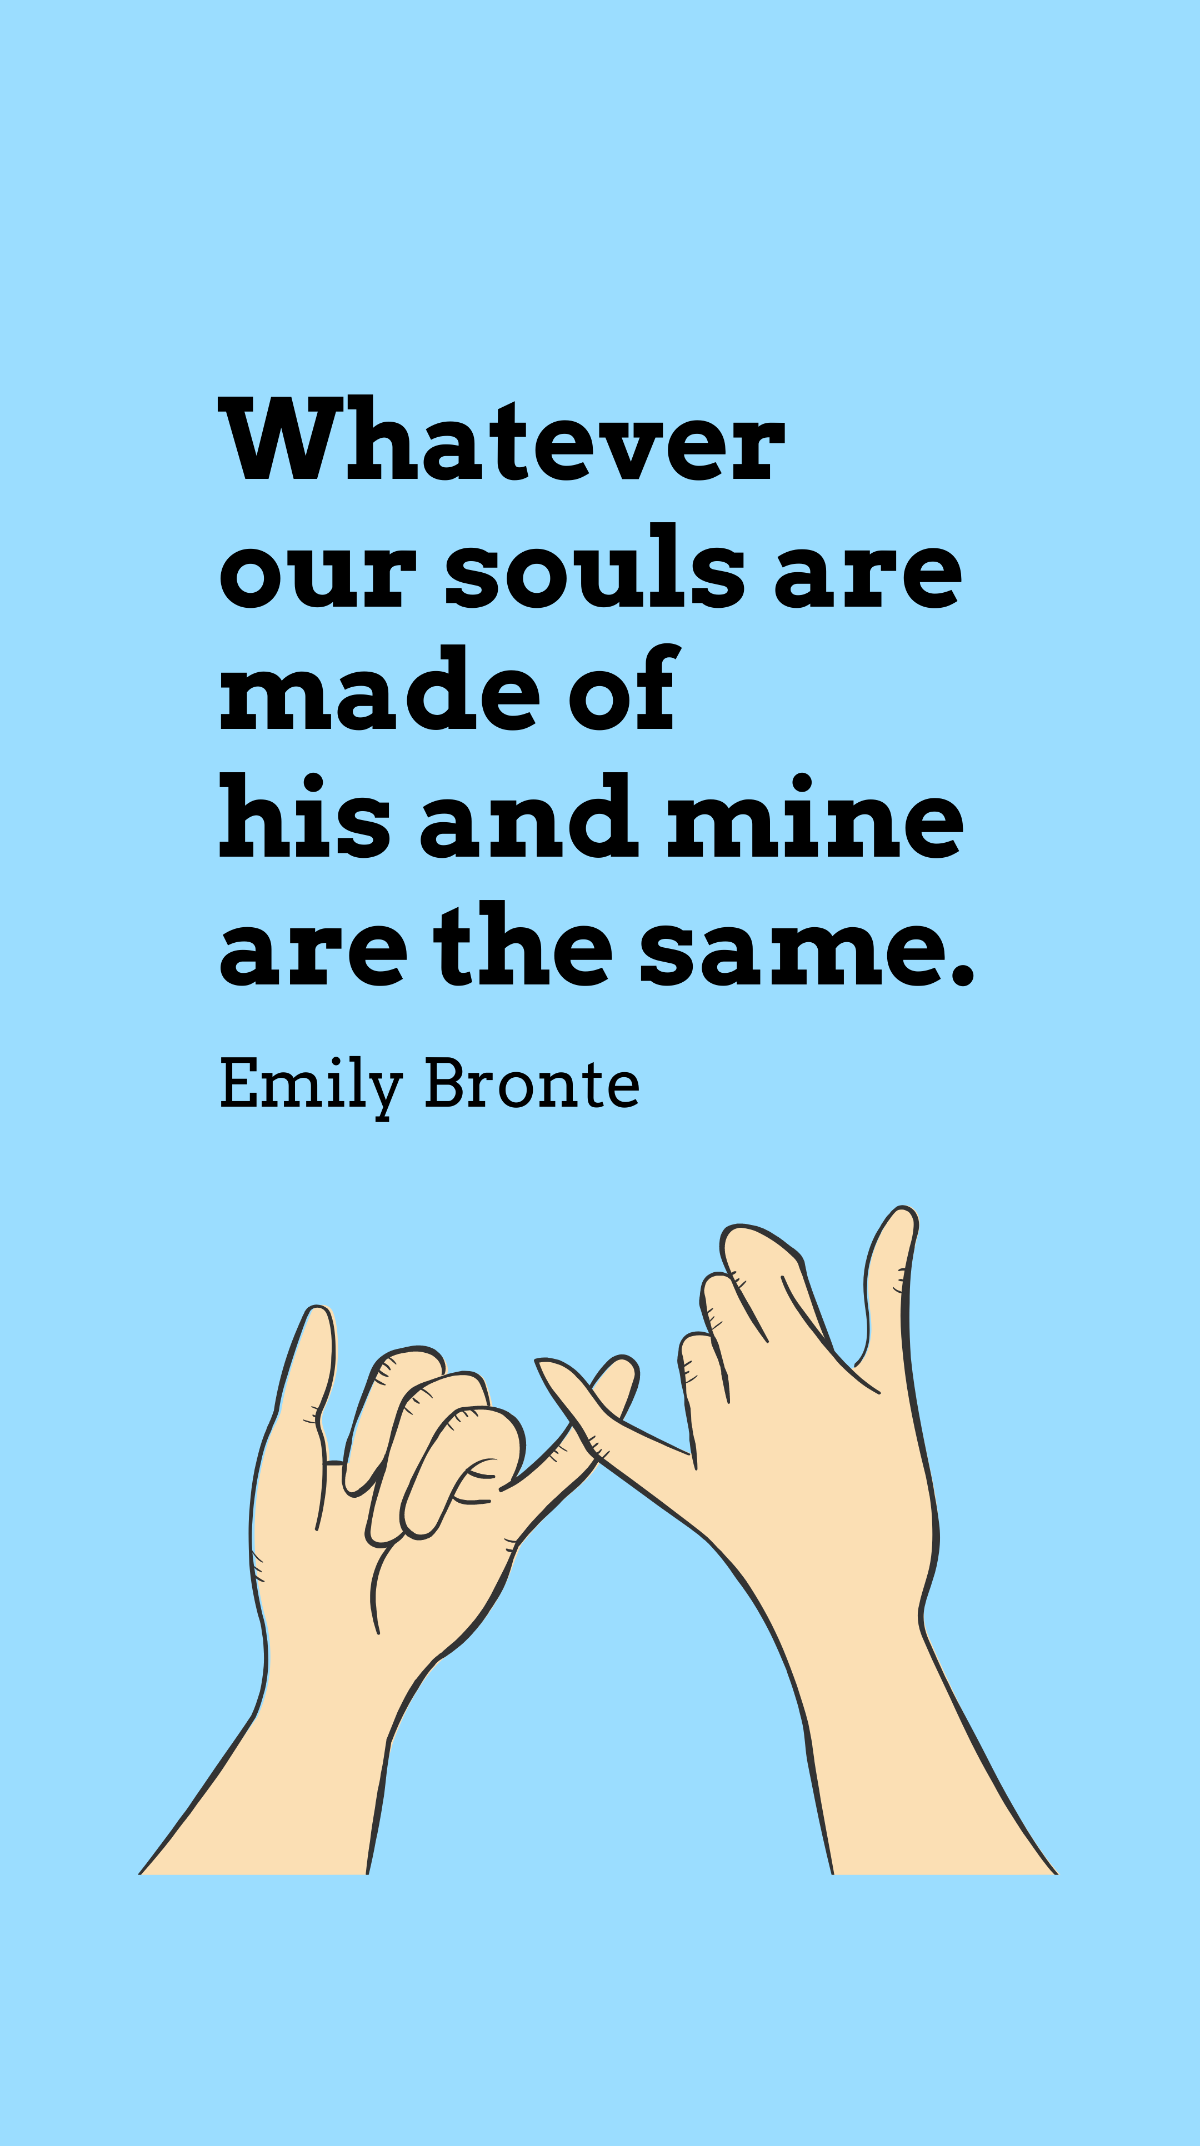 Emily Bronte - Whatever our souls are made of his and mine are the same.